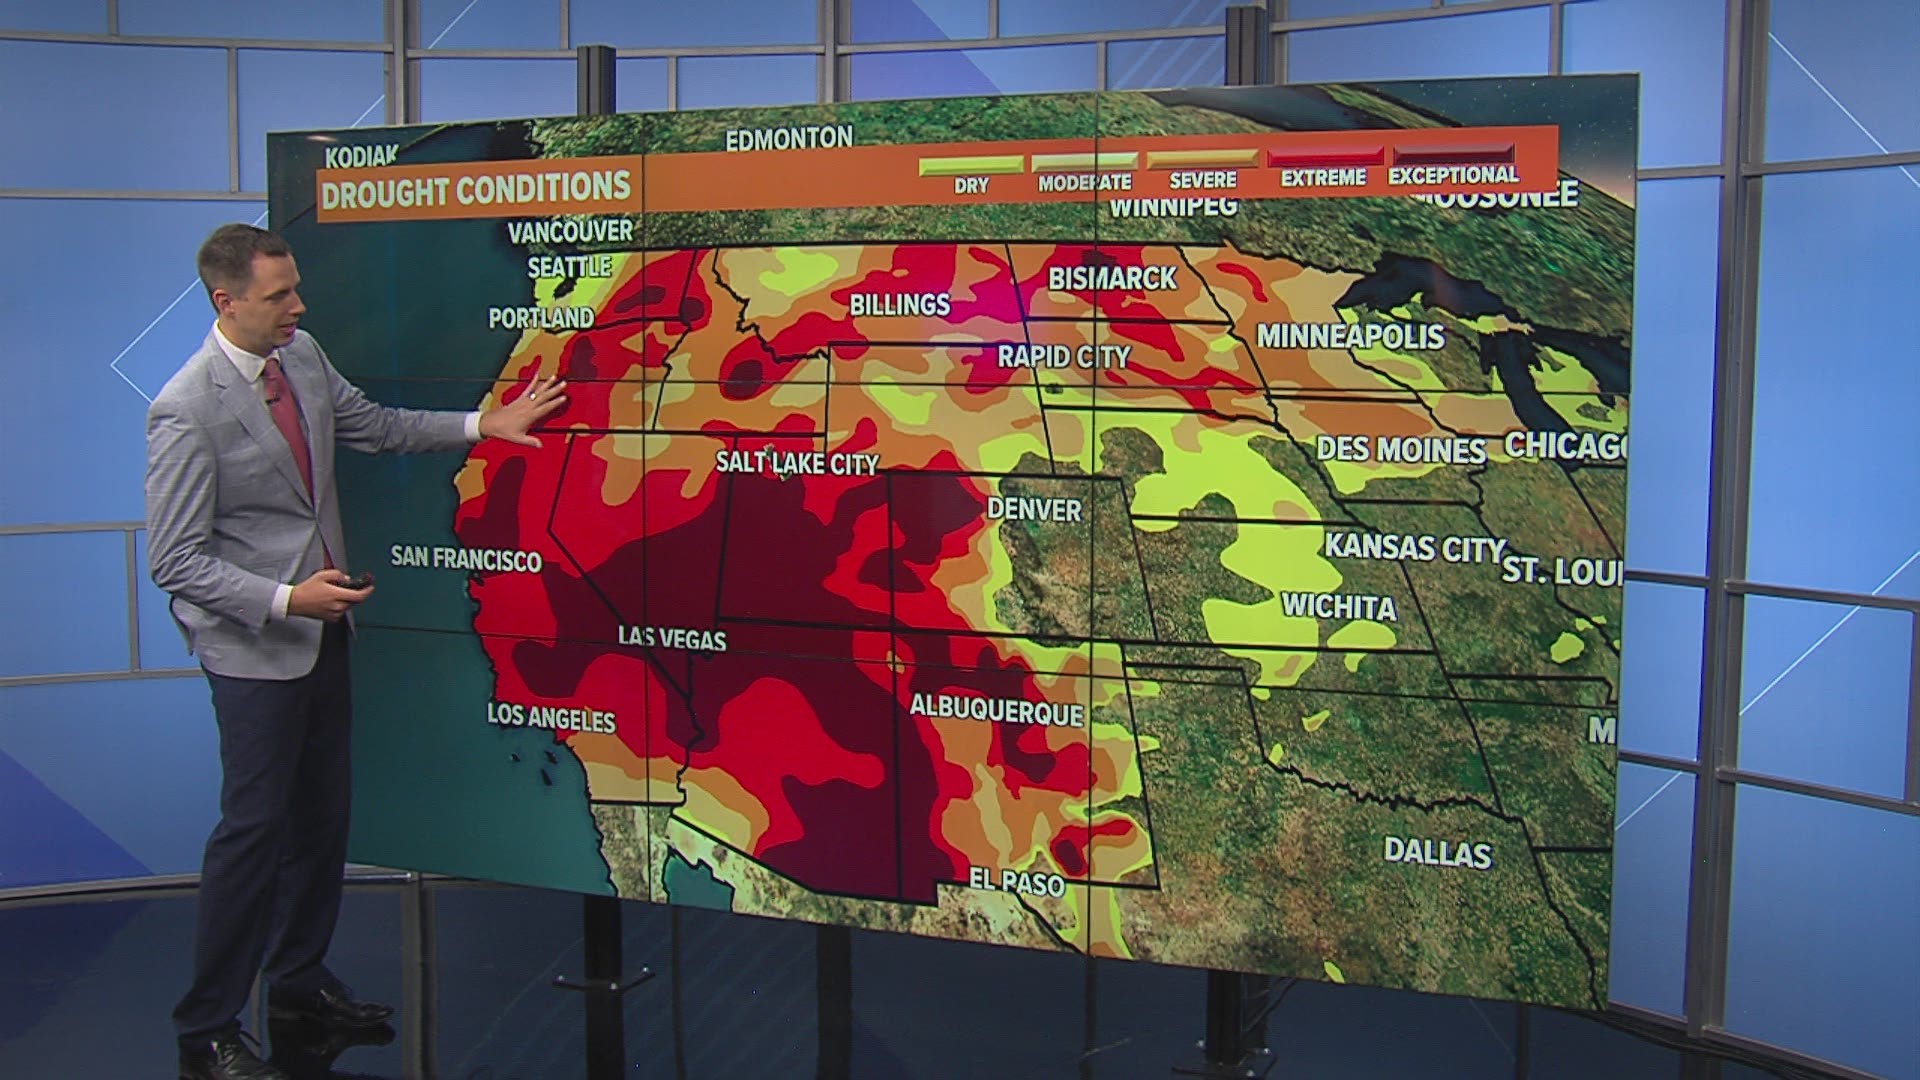 Wildfires from the western U.S. and Canada have filled the sky with smoke over the past several weeks